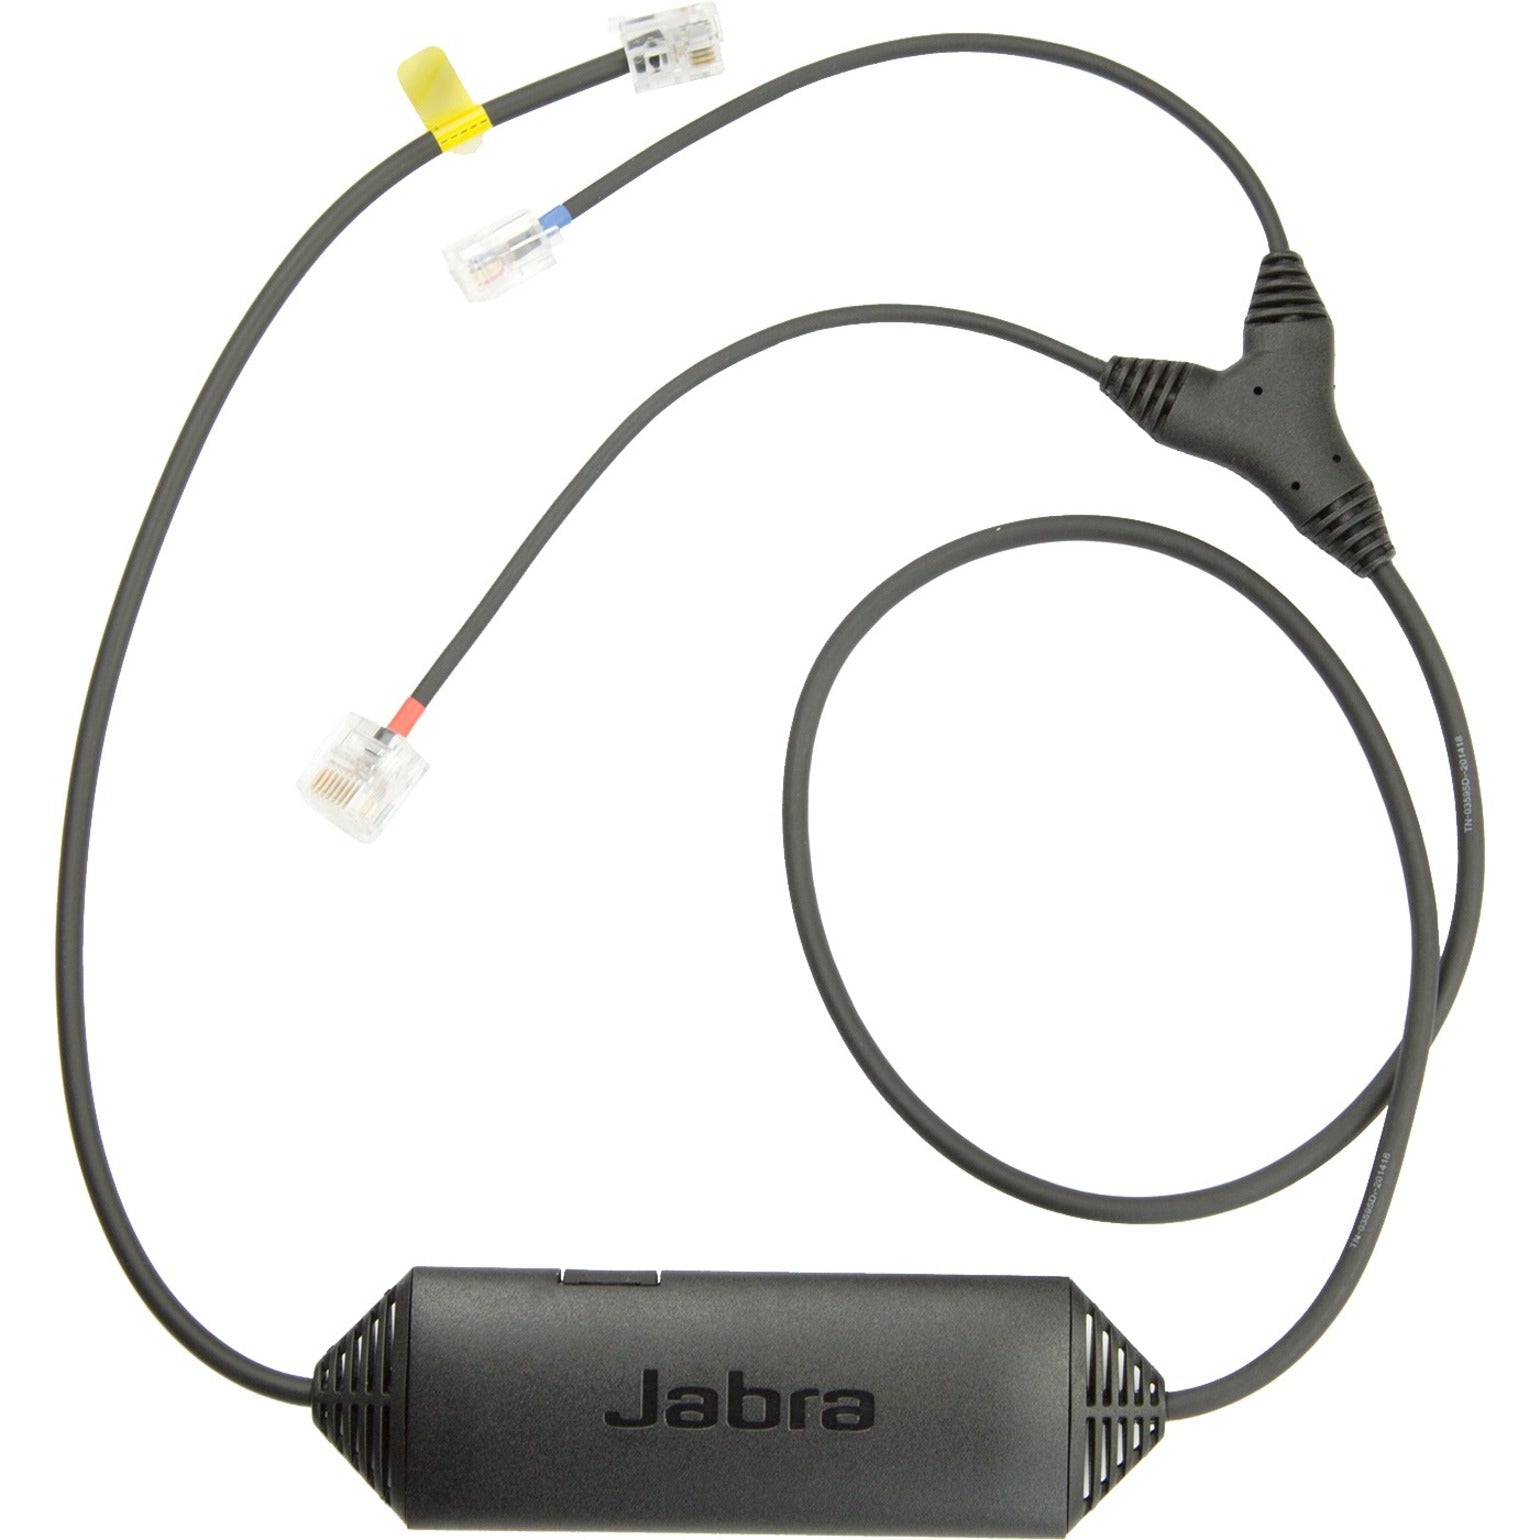 Jabra 14201-41 LINK Electronic Hook Switch, Cisco Compatible, for PRO 9400, PRO 900, Motion Office